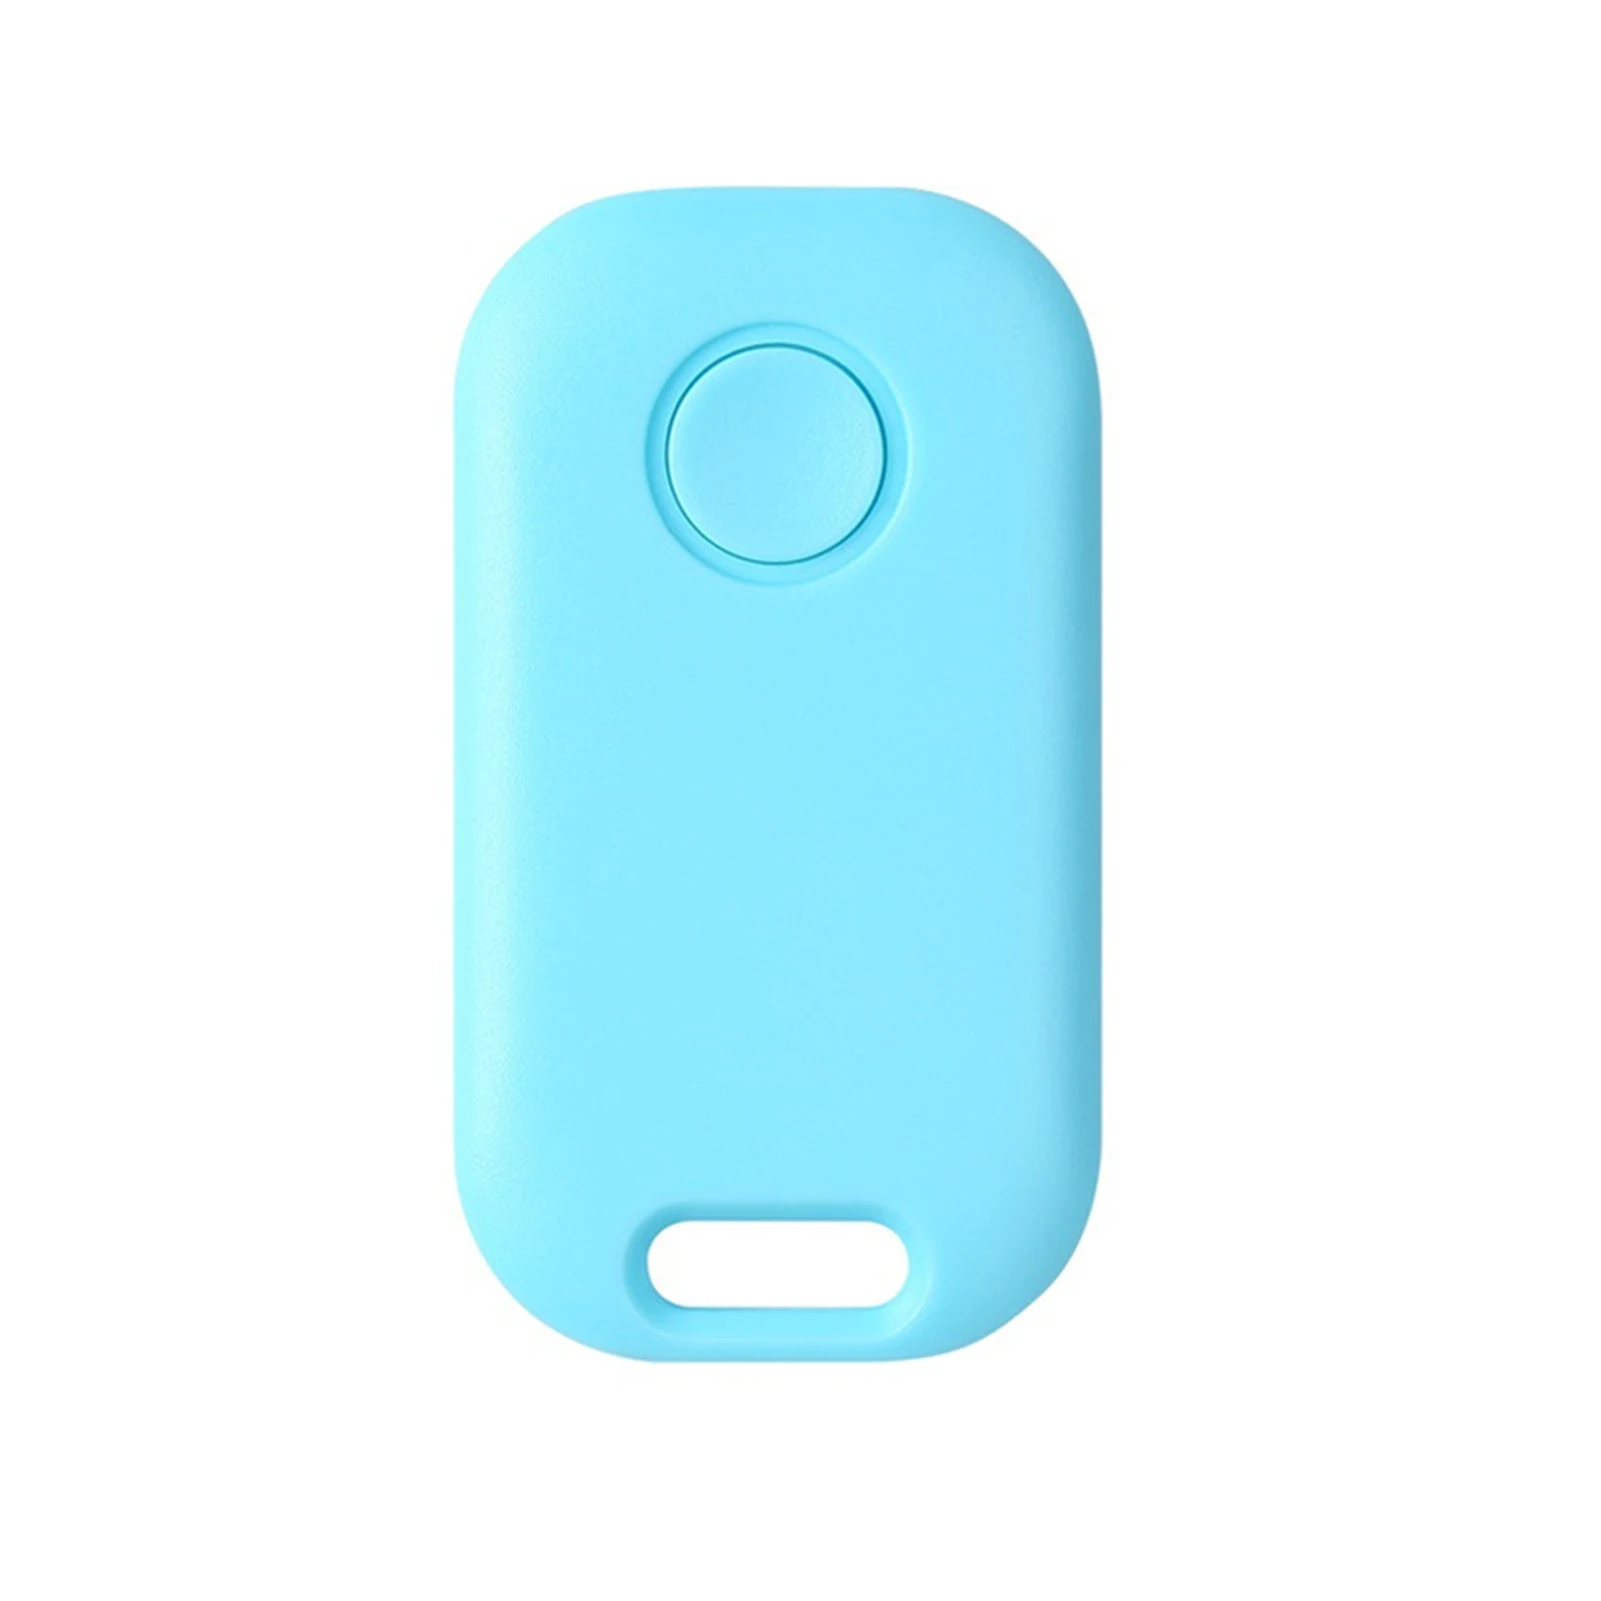 

Mini Tracking Device Bluetooth-Compatible V4.0 App Locating with Alert Remote Selfie Shutter for Pet Wallets Backpacks